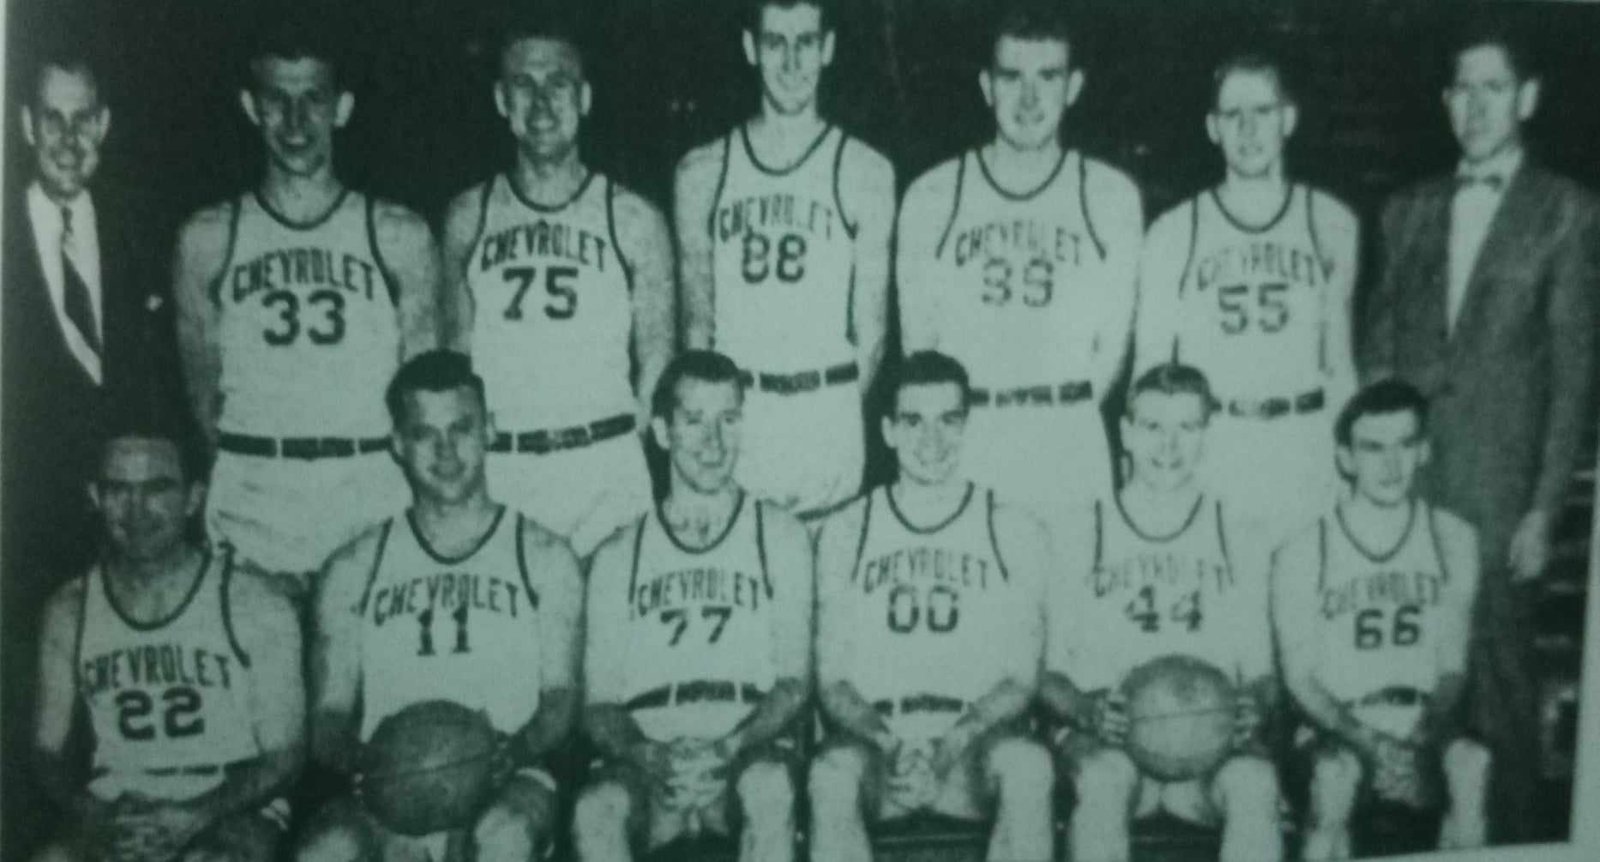 Team America was the tallest among the 10 participating teams in the 1950 World games with nine players over six feet tall.